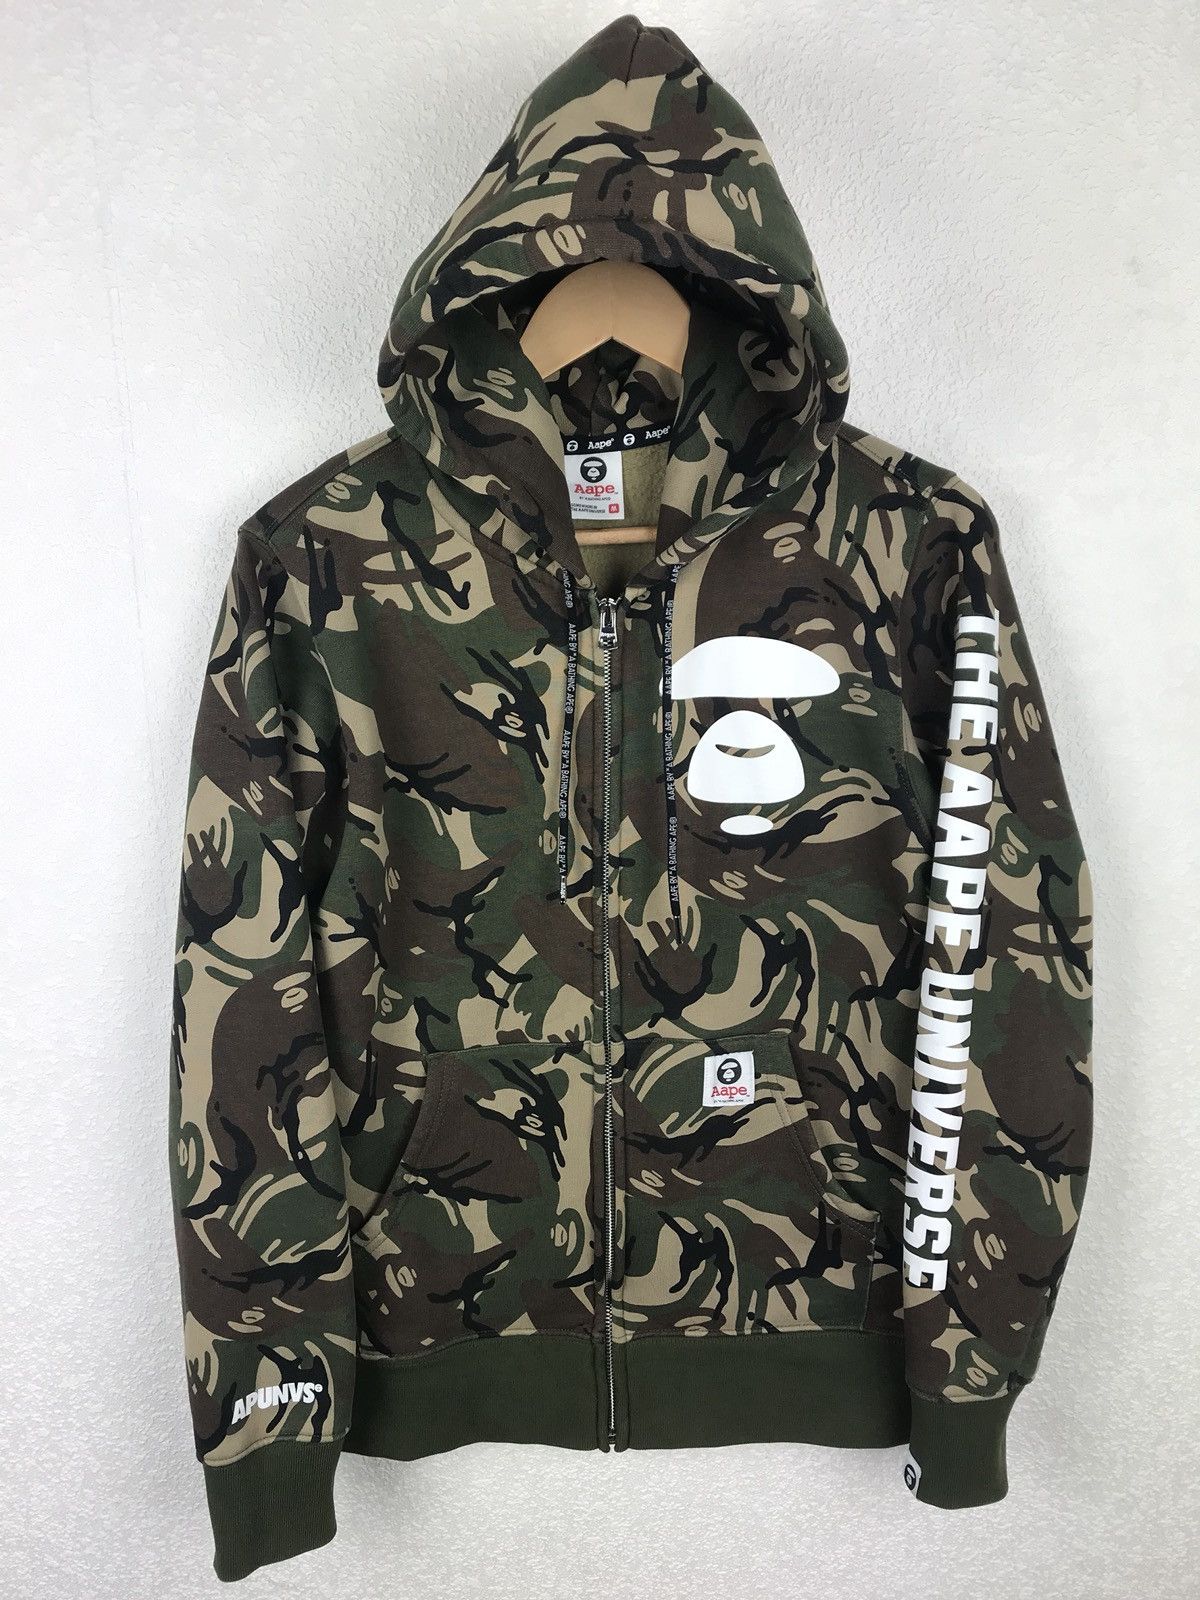 Bape Aape A Bathing Ape Camouflage Full Zip Hoodie Size US M / EU 48-50 / 2 - 1 Preview